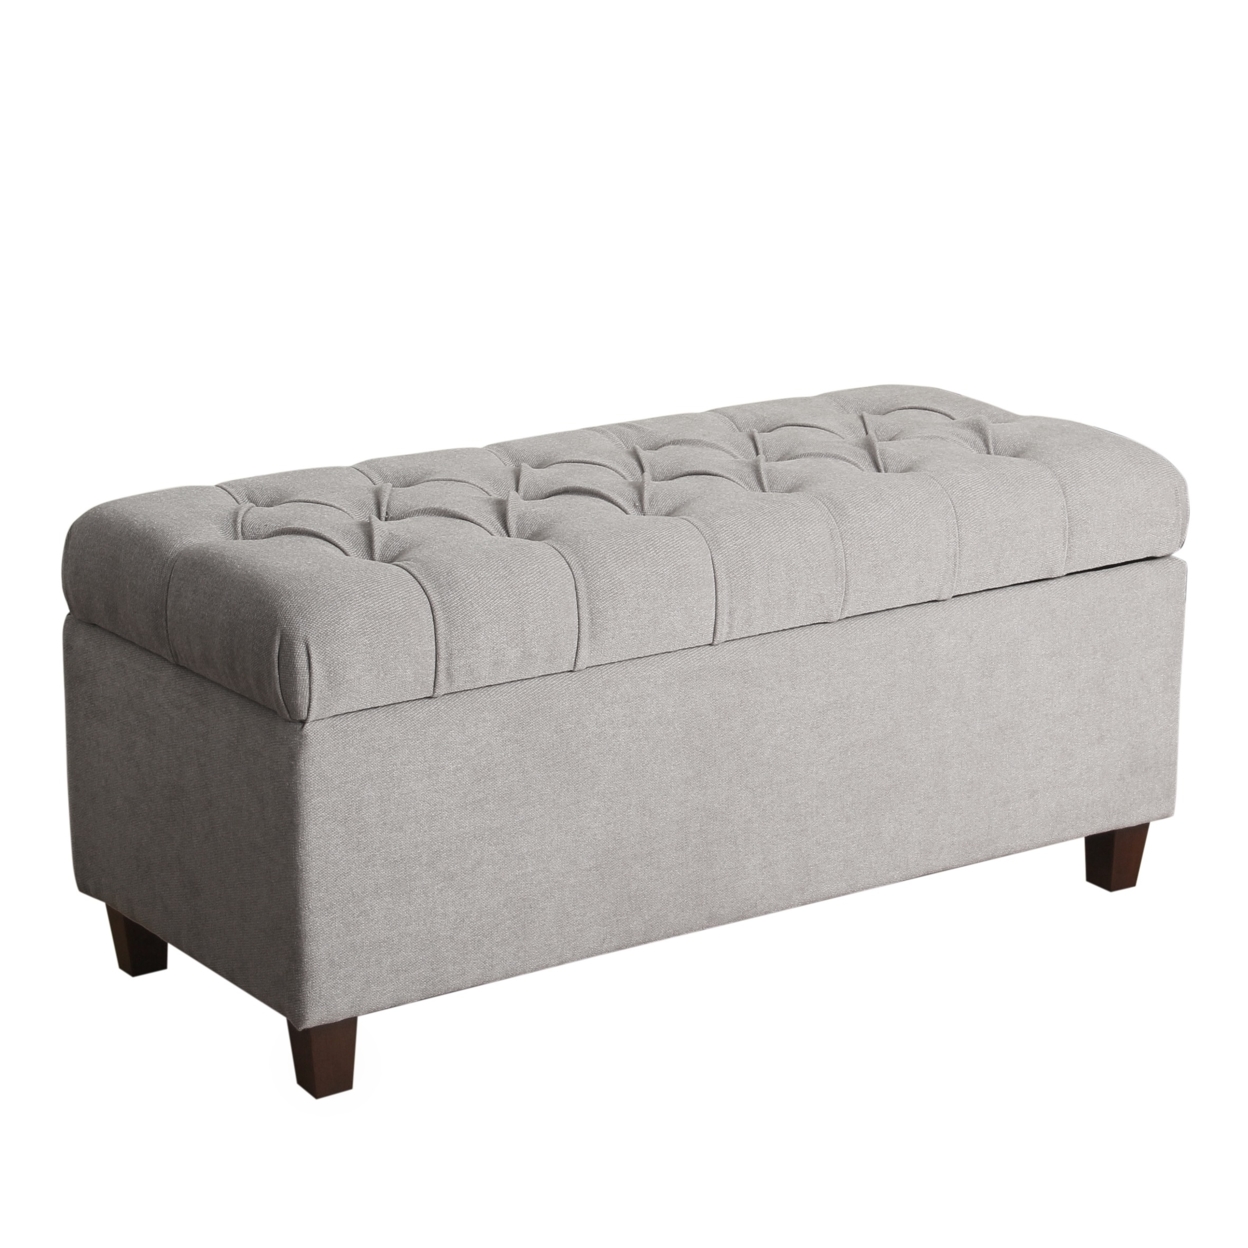 Fabric Upholstered Button Tufted Wooden Bench With Hinged Storage, Gray and Brown